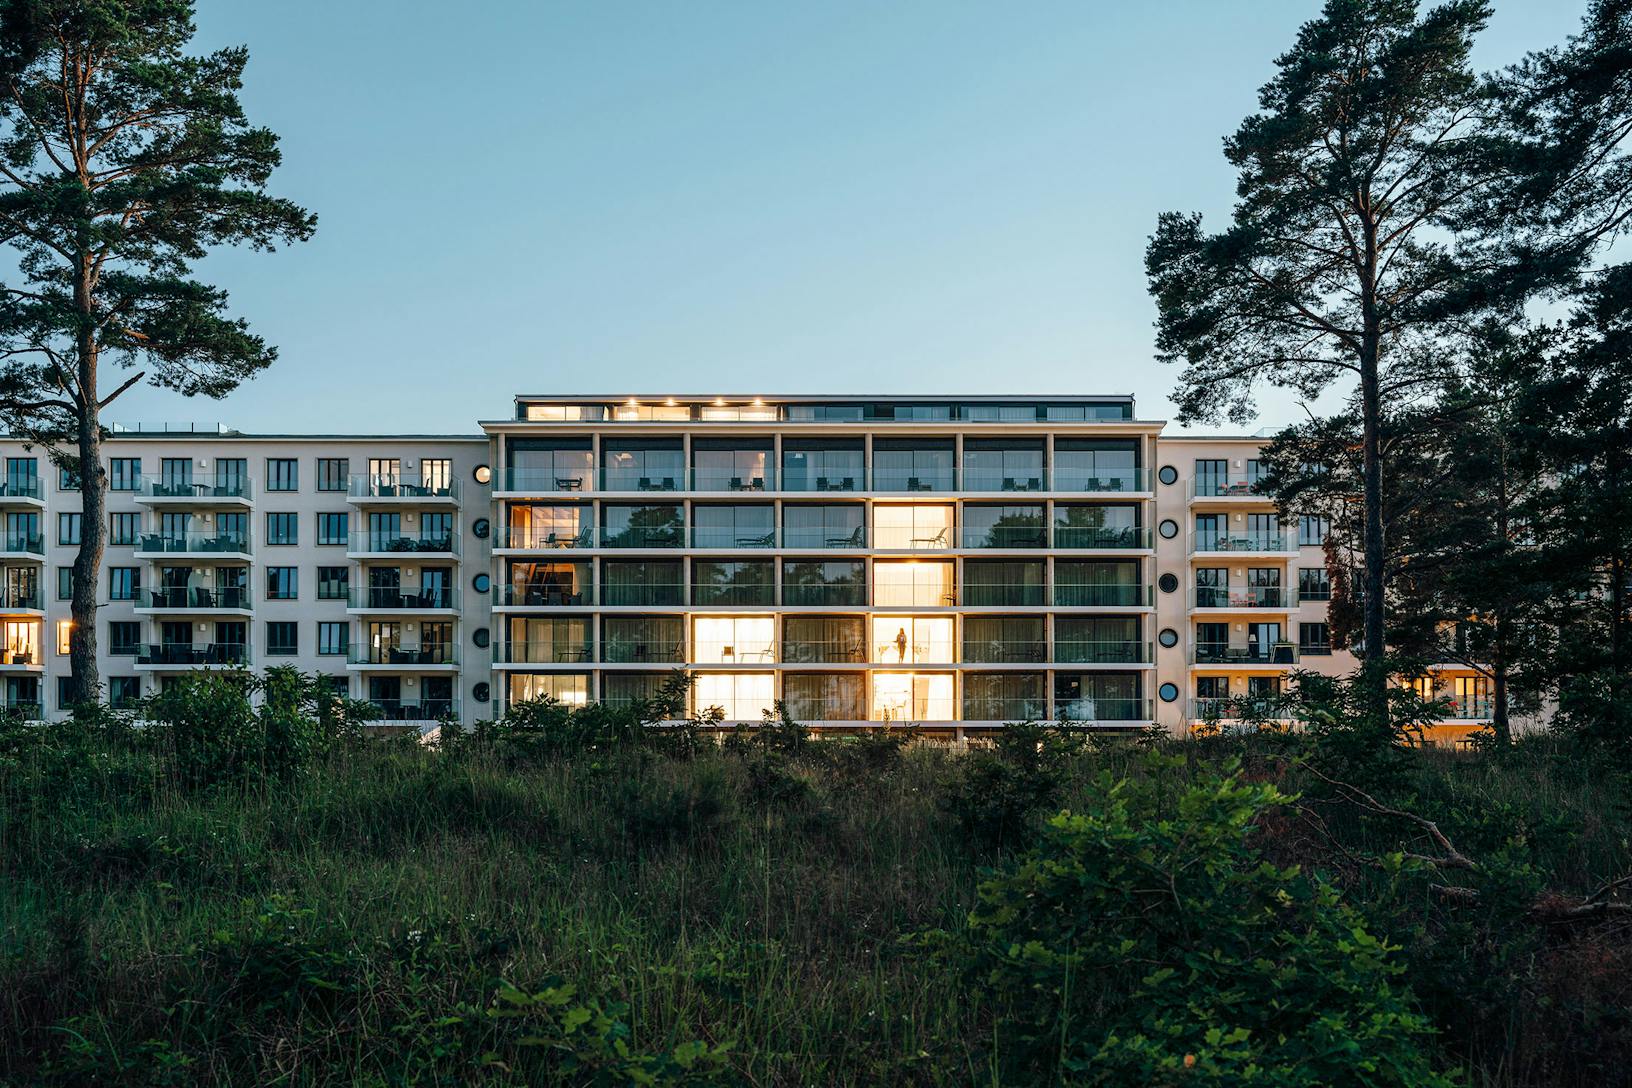 A multifamily apartment building with a sleek and modern architecture featuring minimal sliding glass walls, offering a breathtaking view of the dusk-lit forest